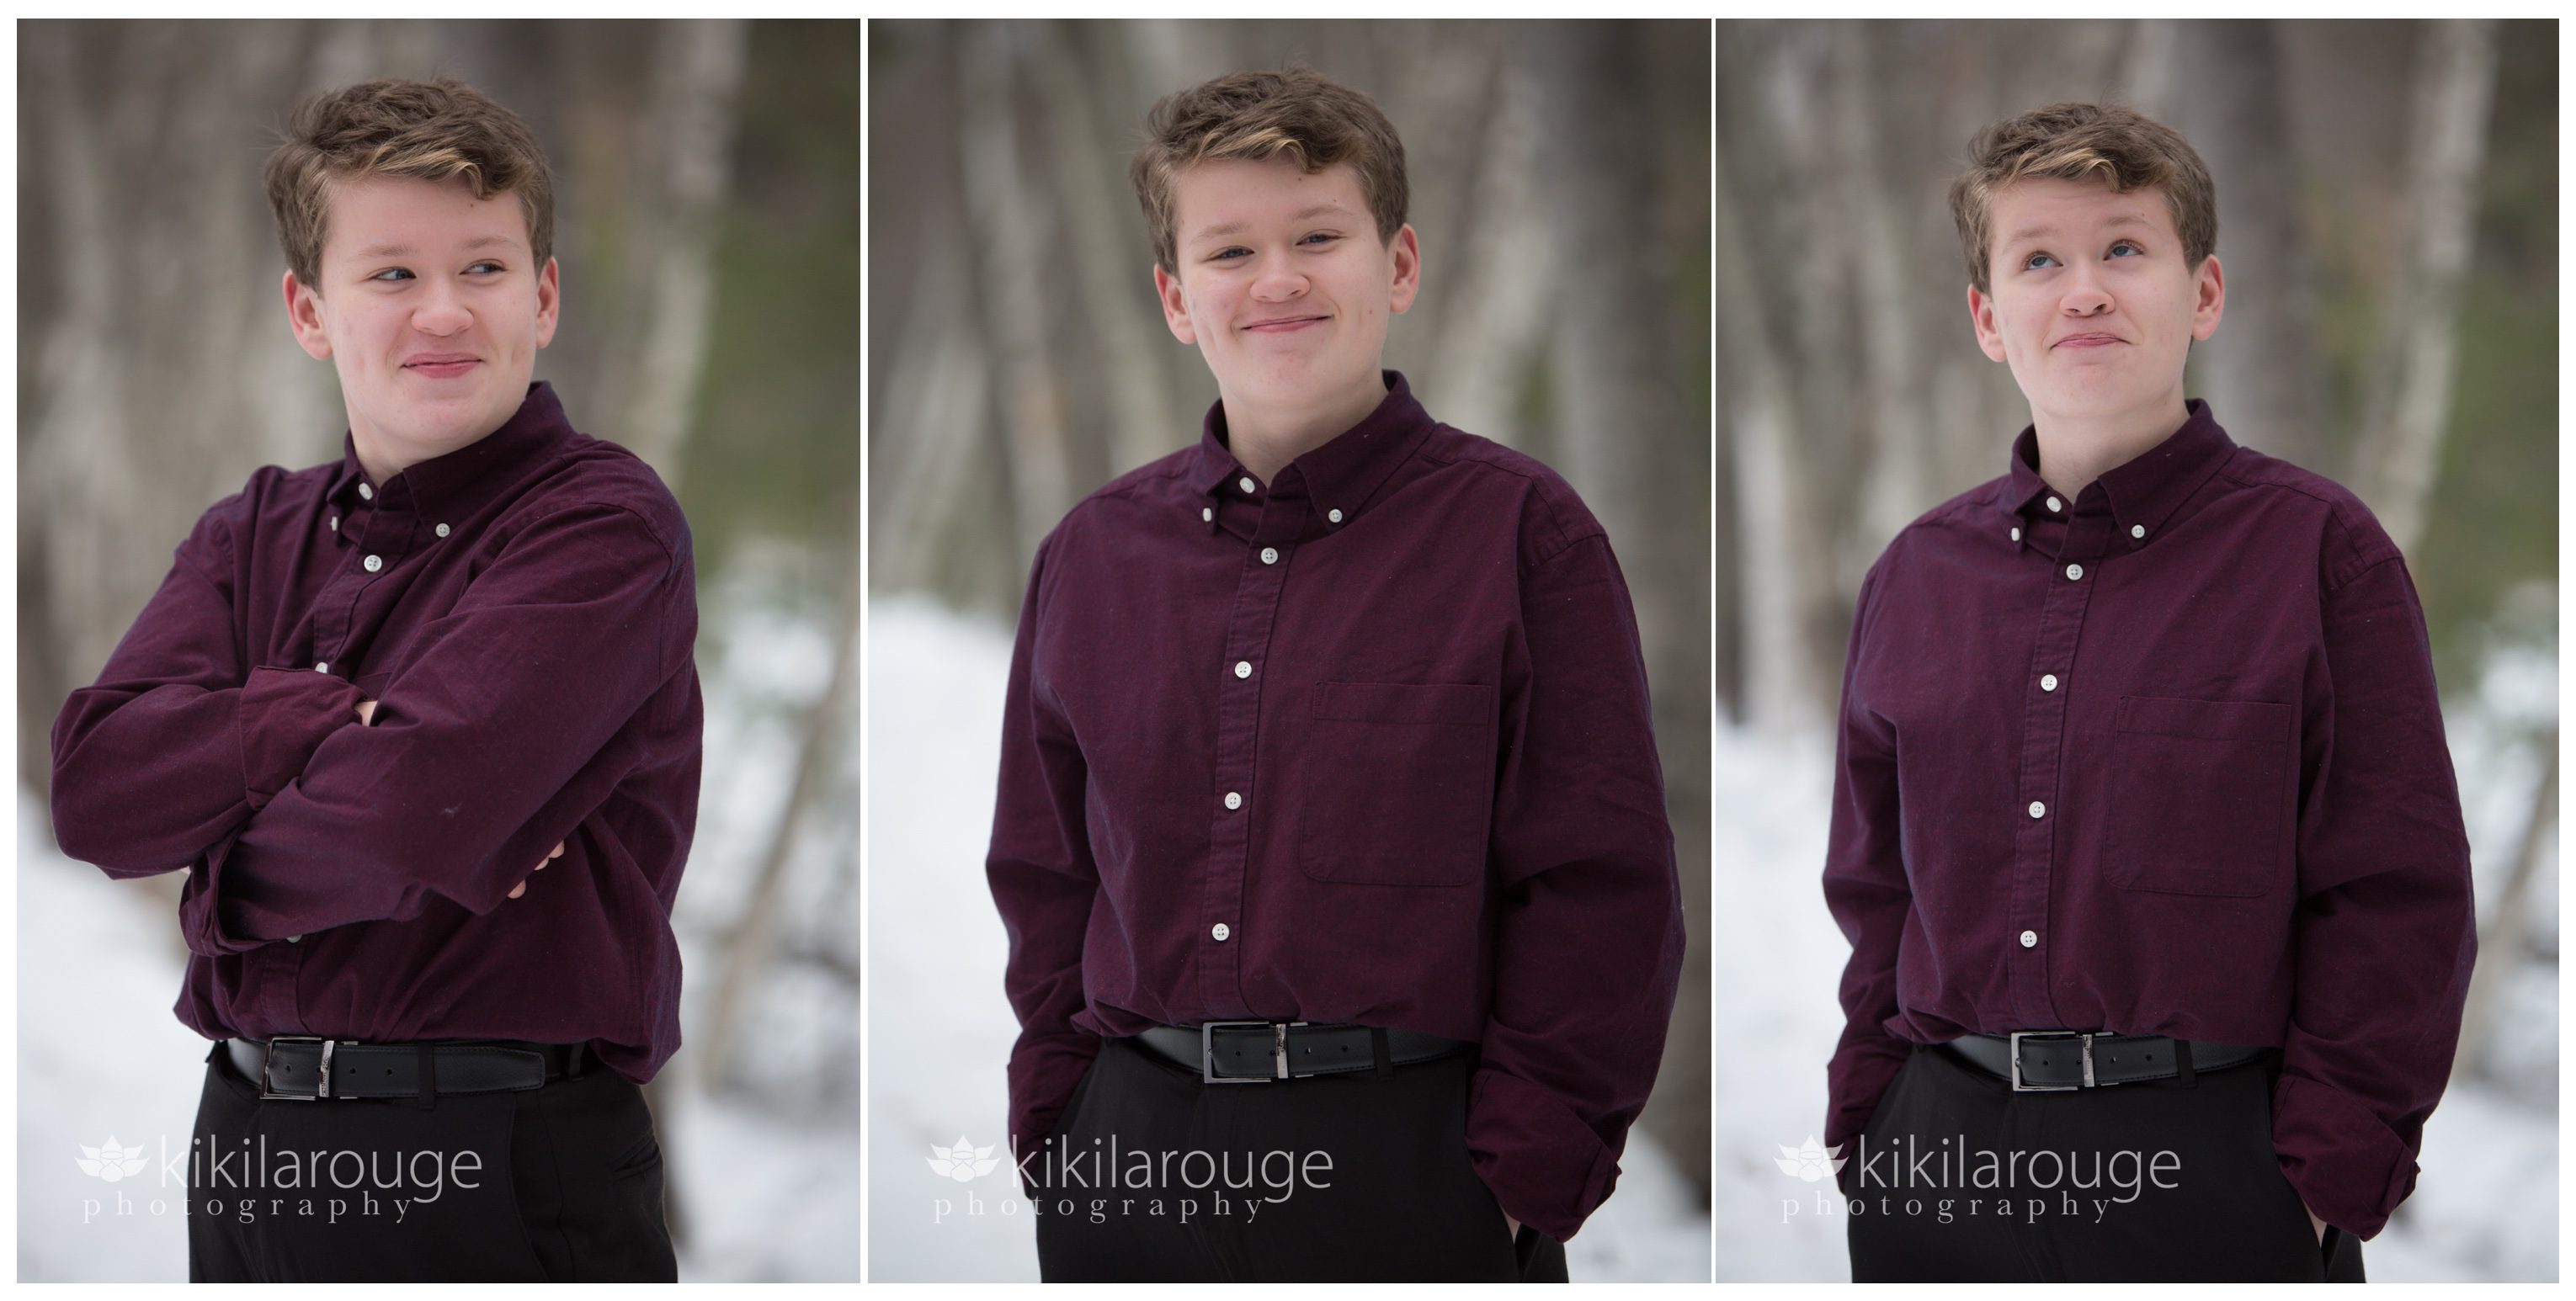 Triptych of teenage boy with expressions